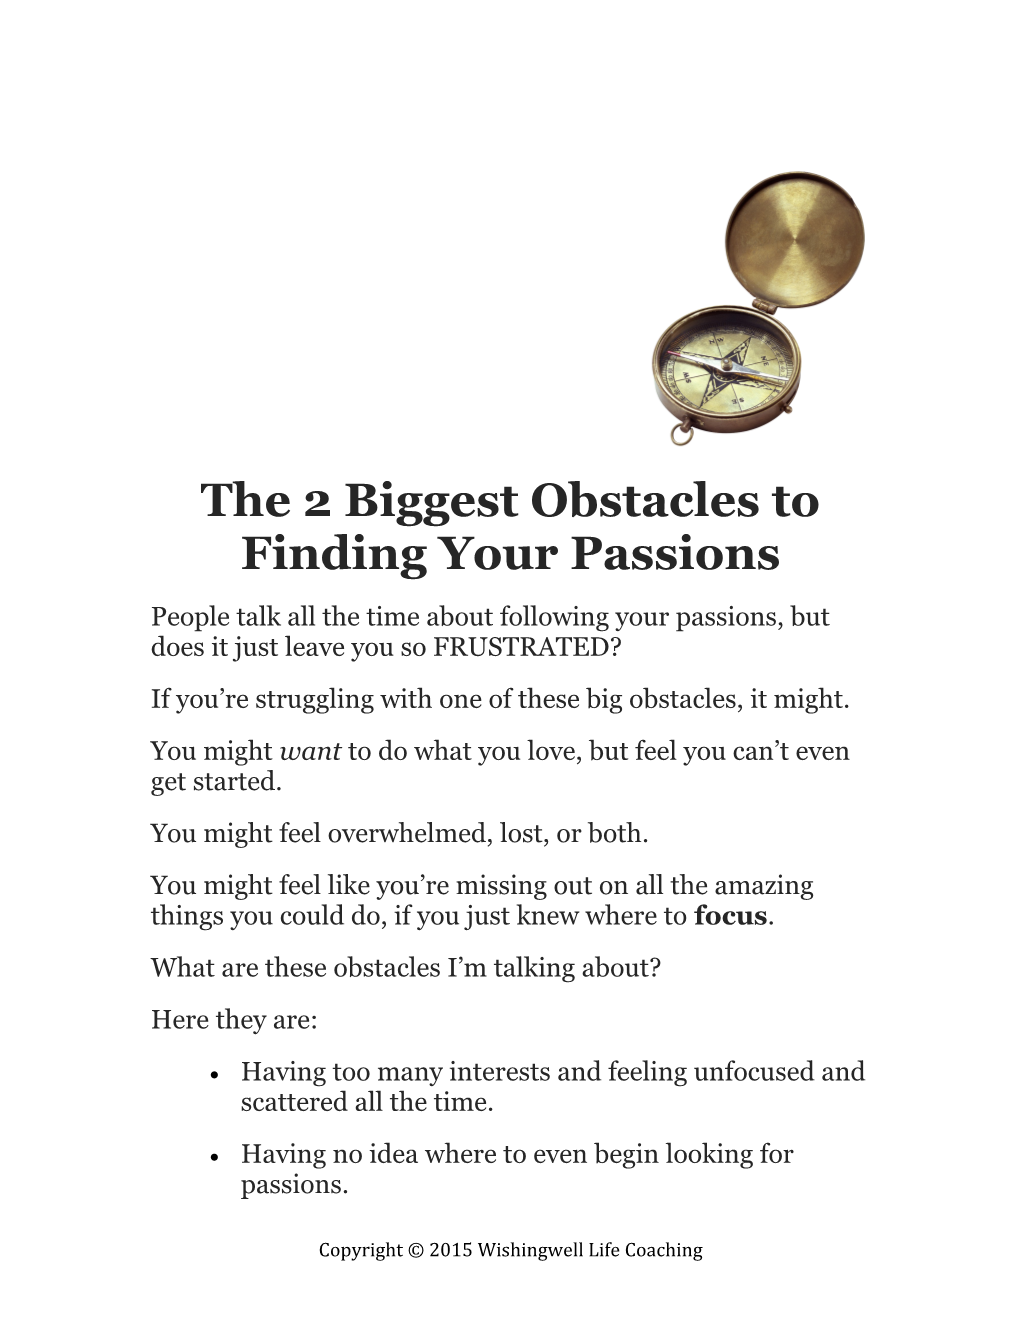 The 2 Biggest Obstacles to Finding Your Passions